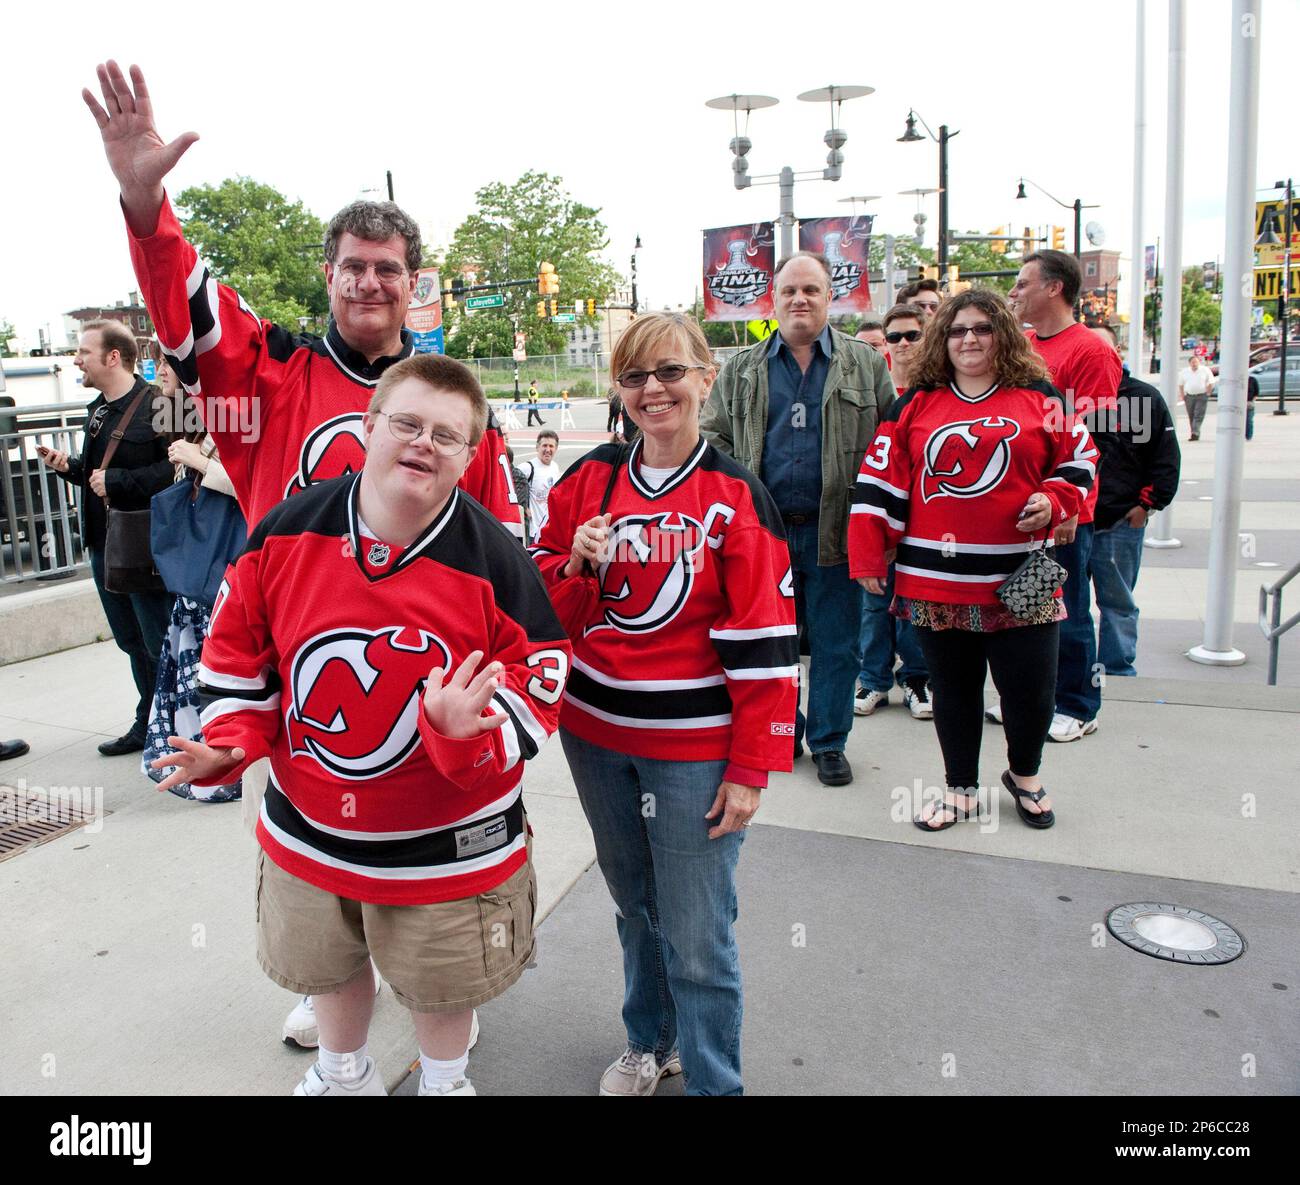 June 02 2012: New Jersey Devils' fans wait in line to enter Game 2 of the  2012 Stanley Cup Finals at the Prudential Center in Newark, New Jersey  between the New Jersey